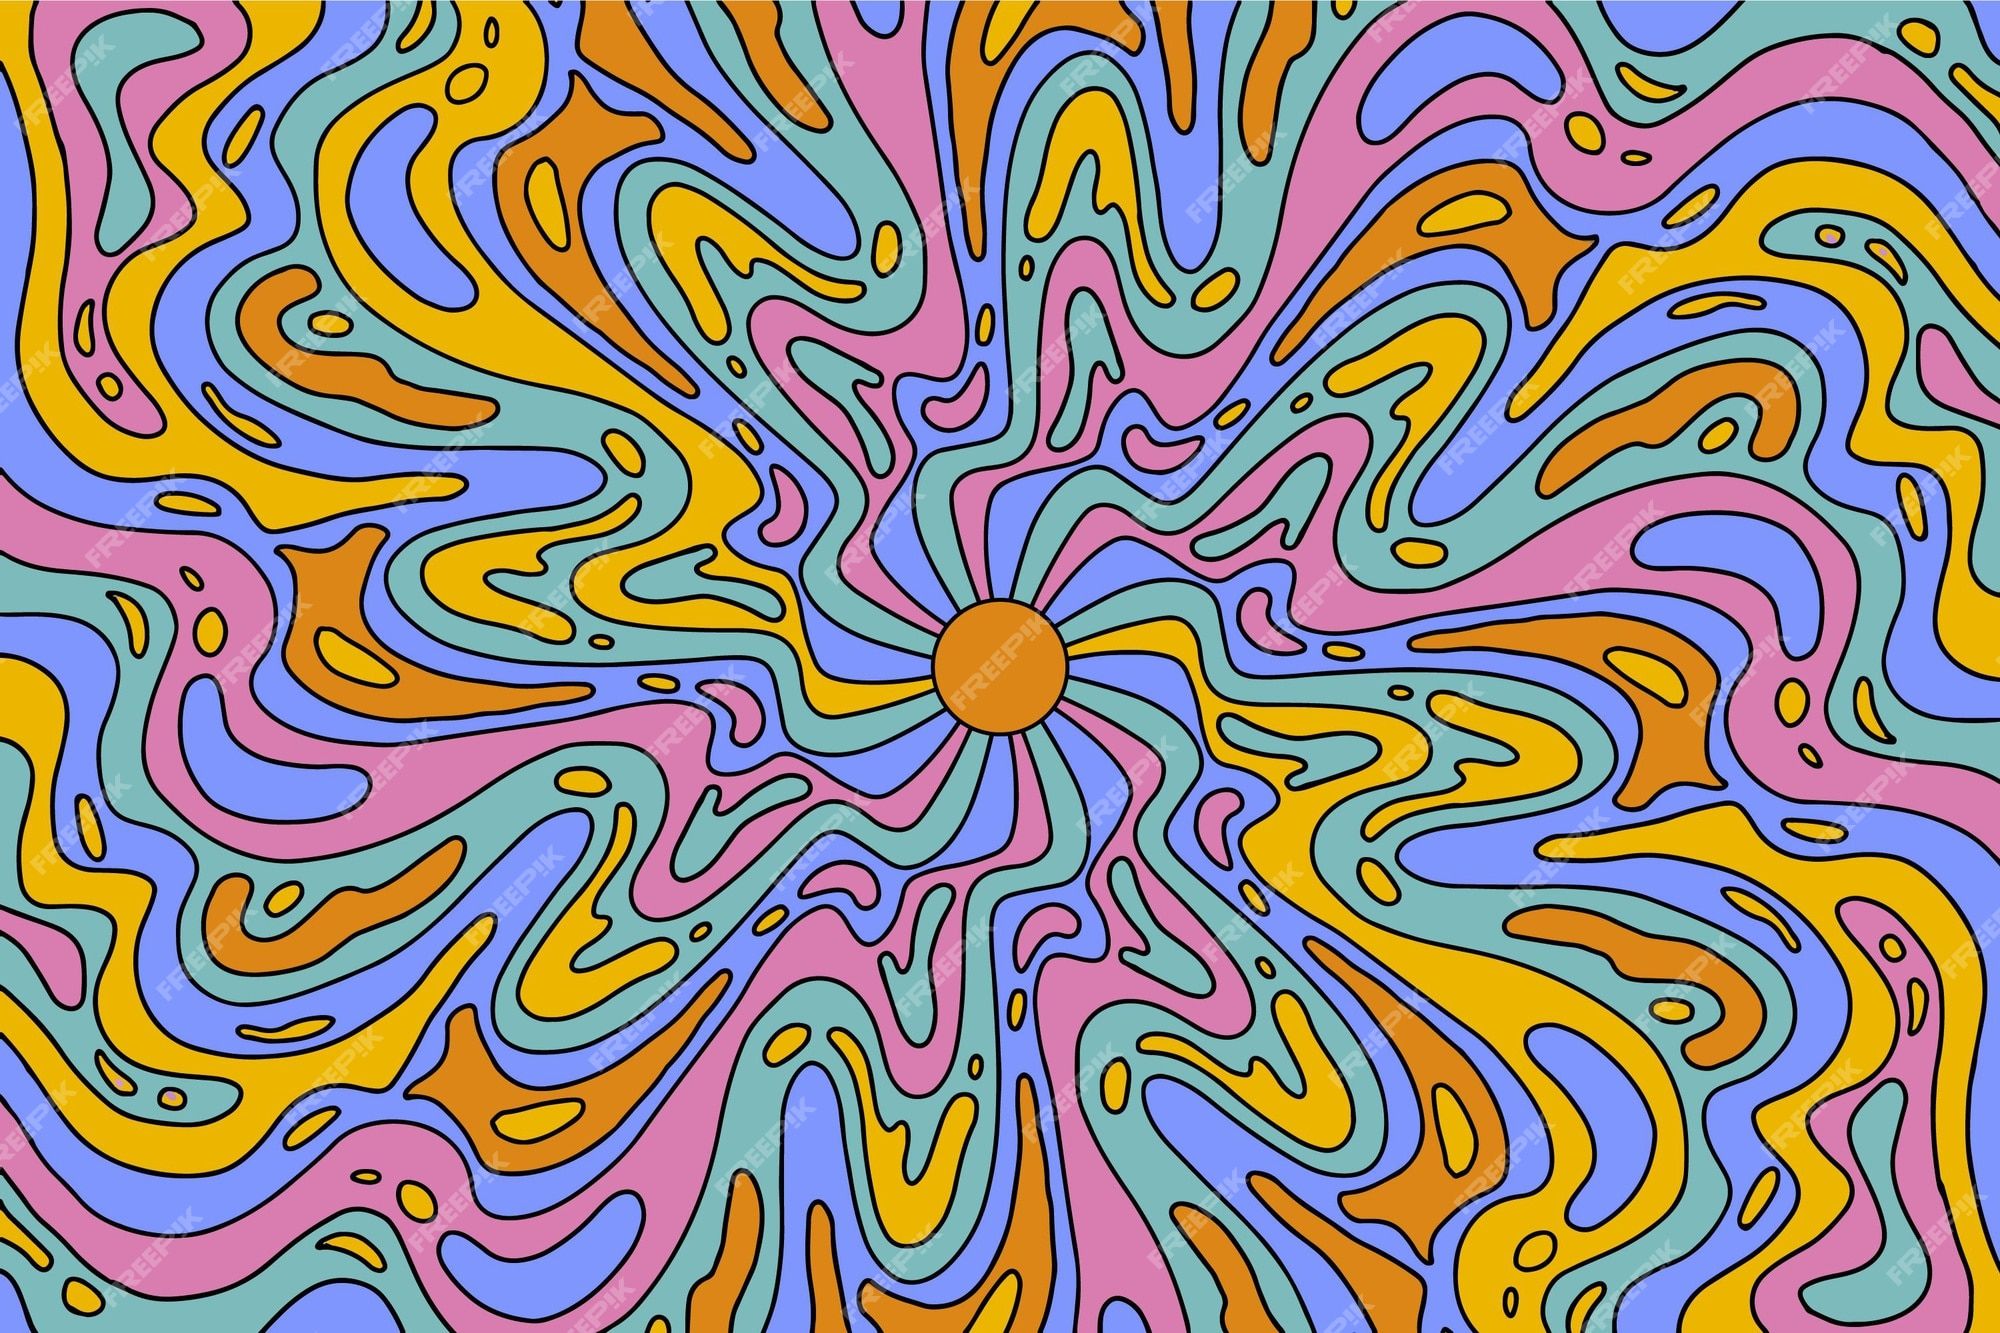 A colorful psychedelic background image with a swirling pattern. - Psychedelic